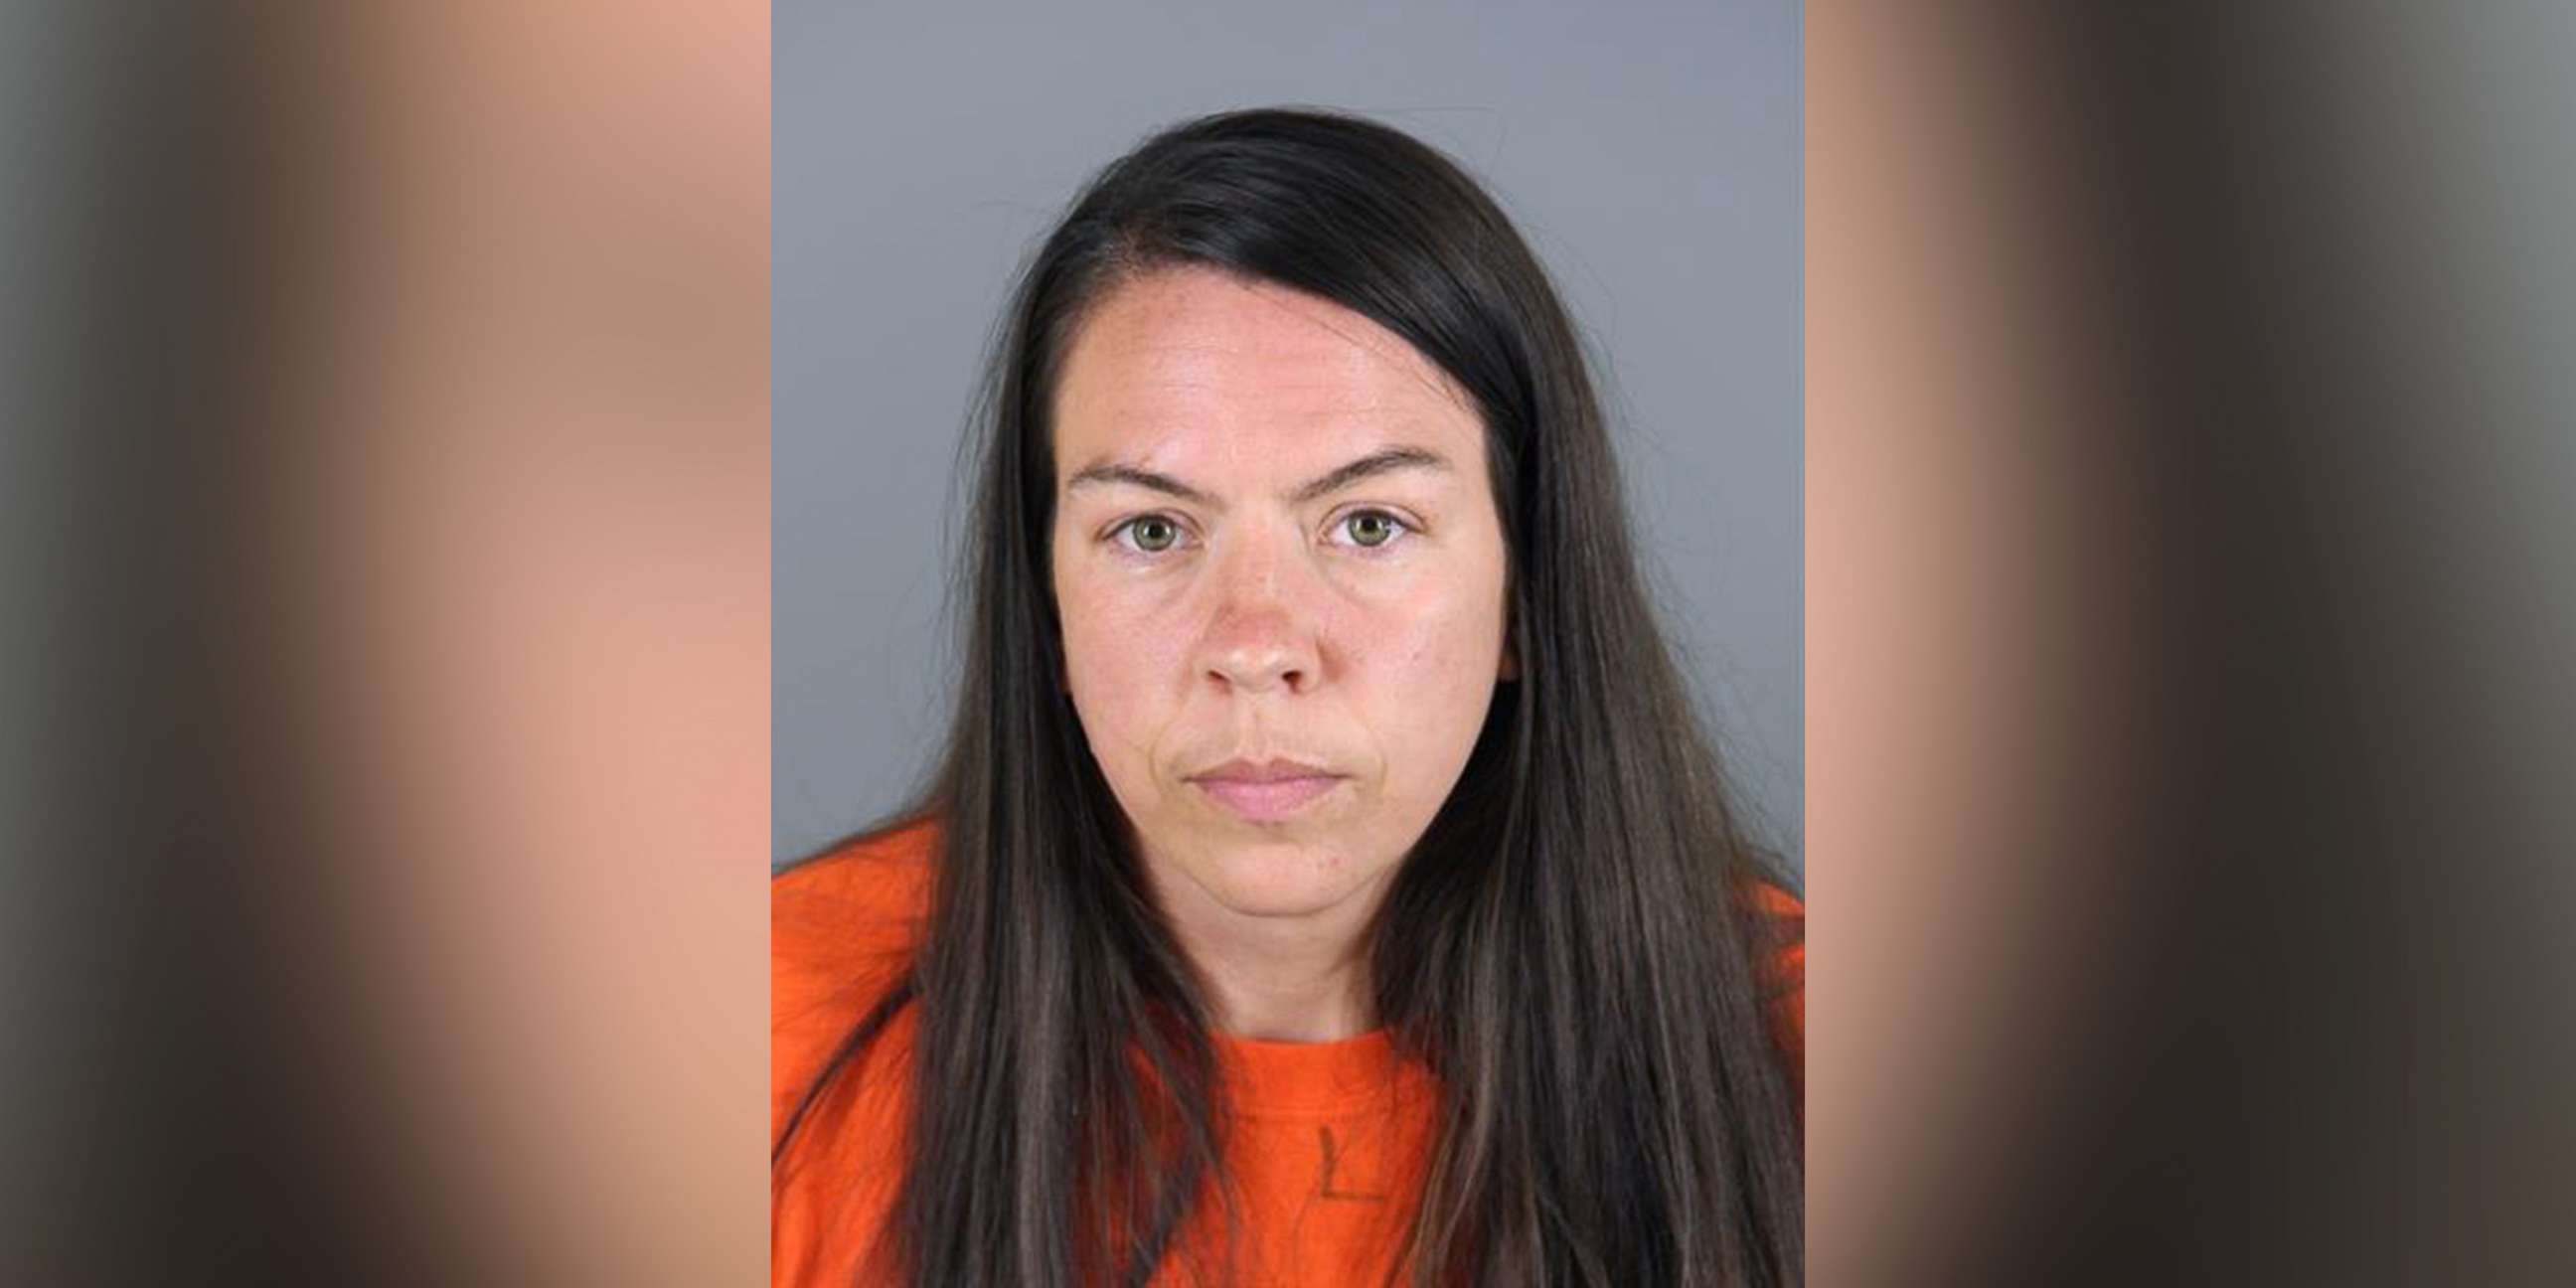 Wisconsin woman arrested, accused of murdering friend with eye drops picture